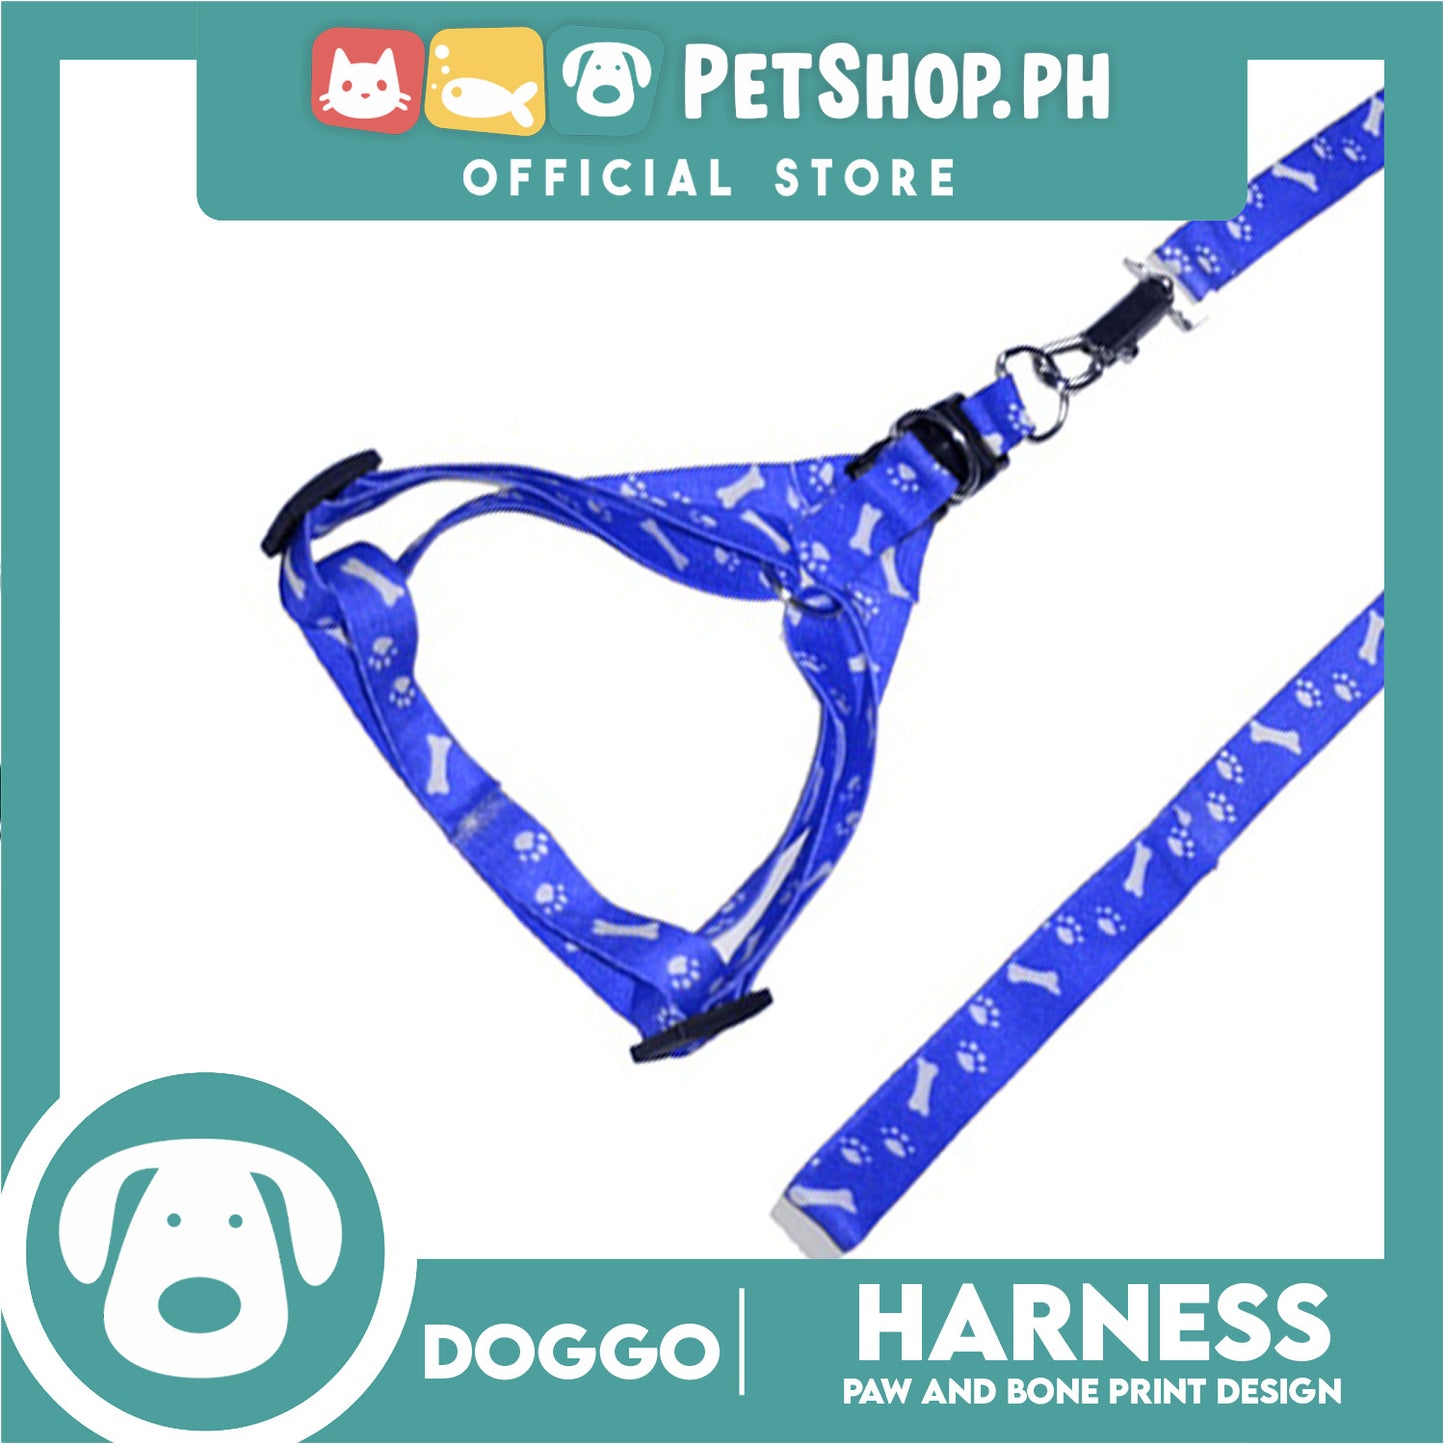 Doggo Harness Leash With Design Small Size (Blue) Harness Leash for Your Puppy